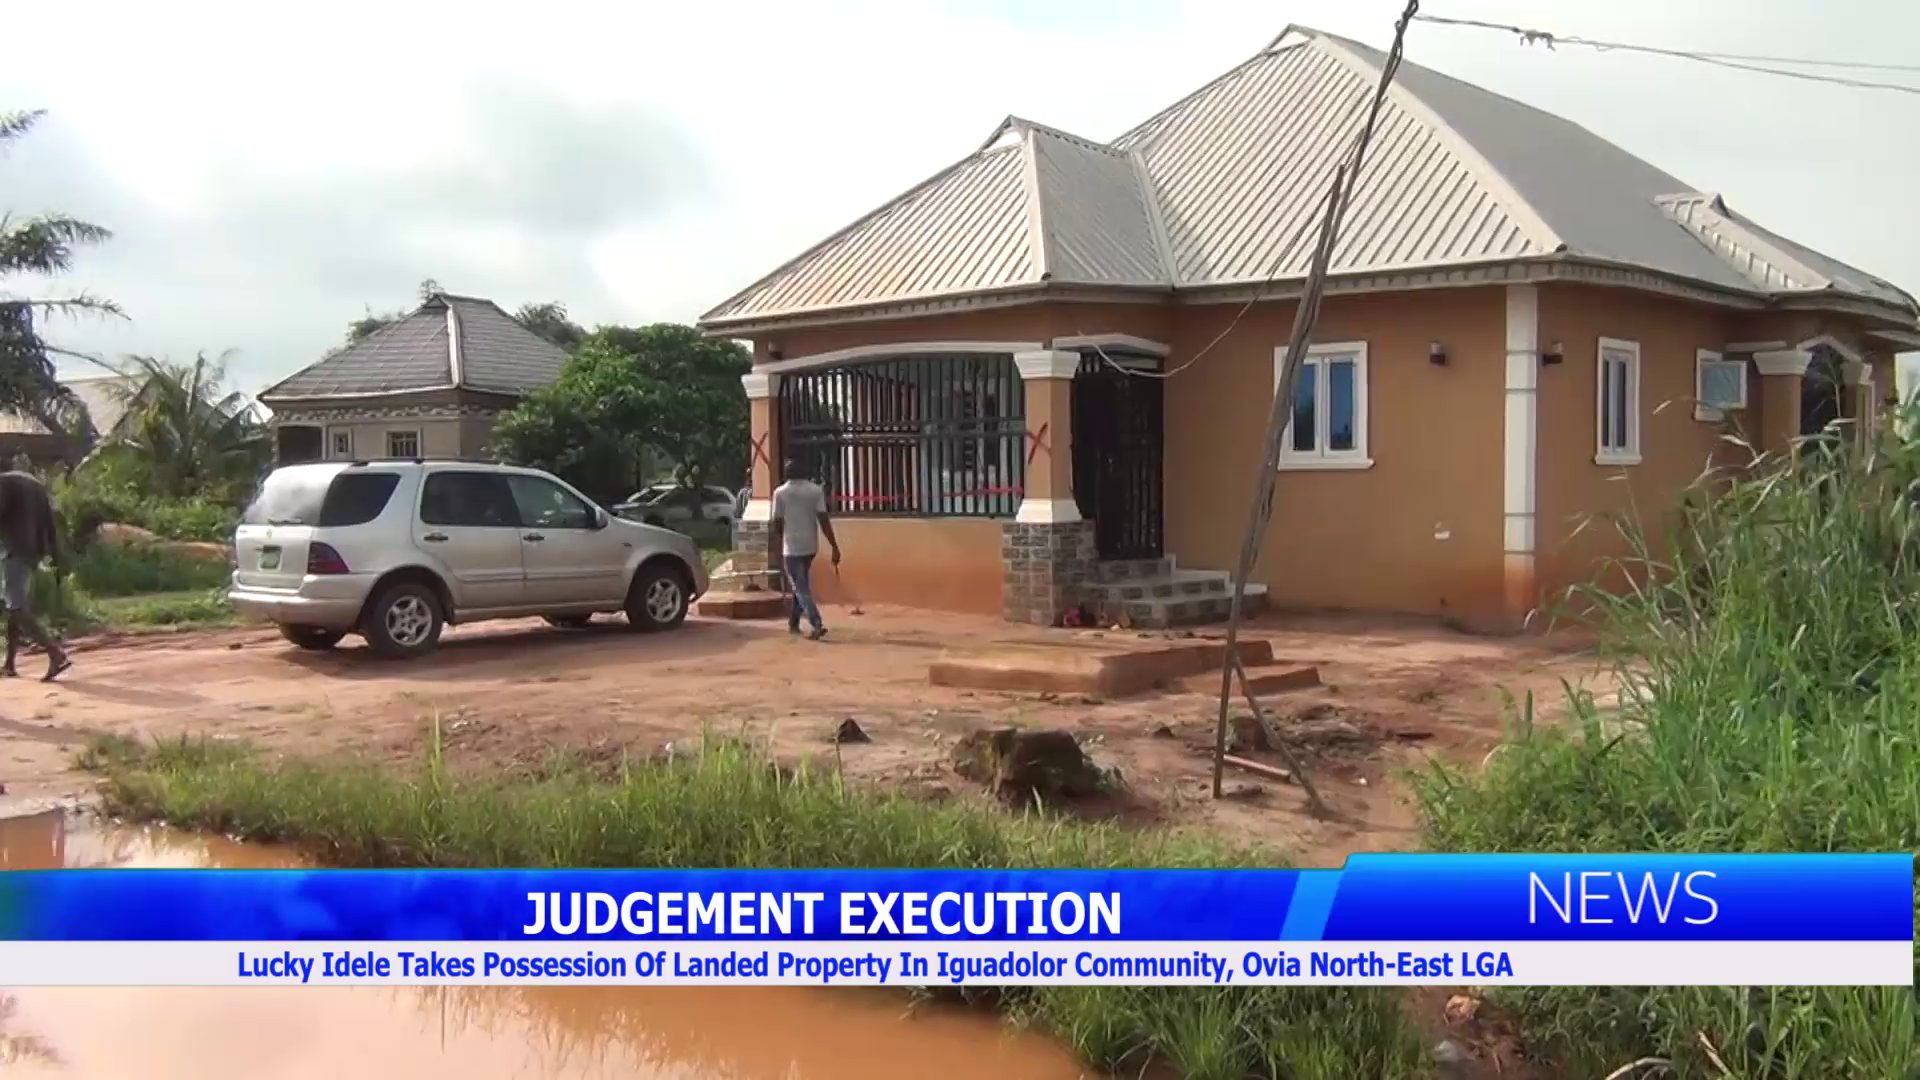 Lucky Idele Takes Possession Of Landed Property In Iguadolor Community, Ovia North-East LGA